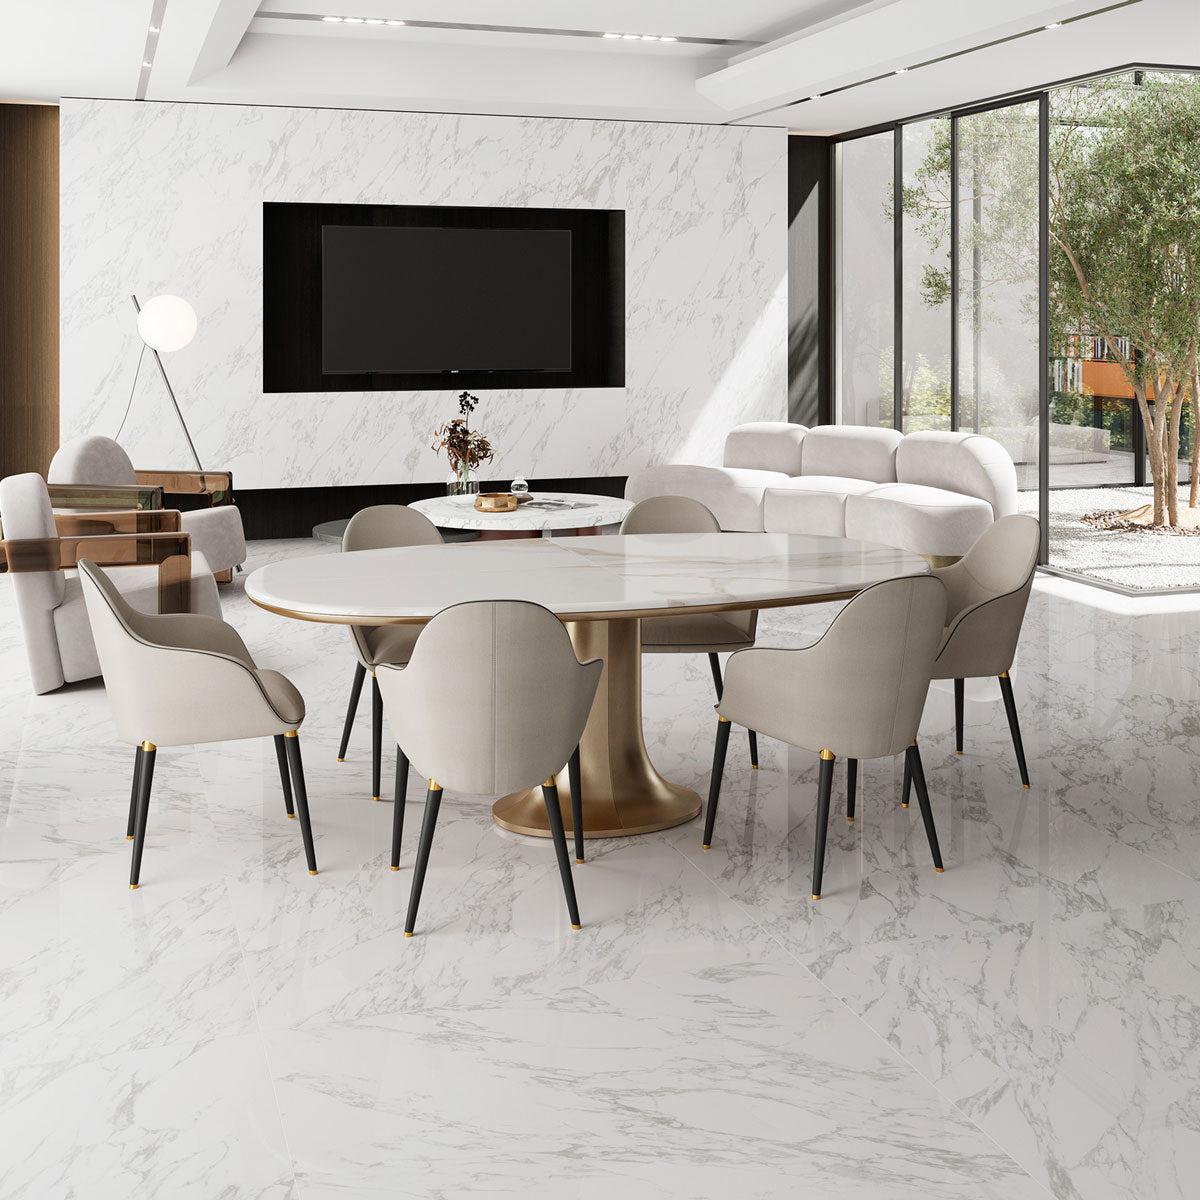 Arabescato Honed Gray and White Marble Look Tile